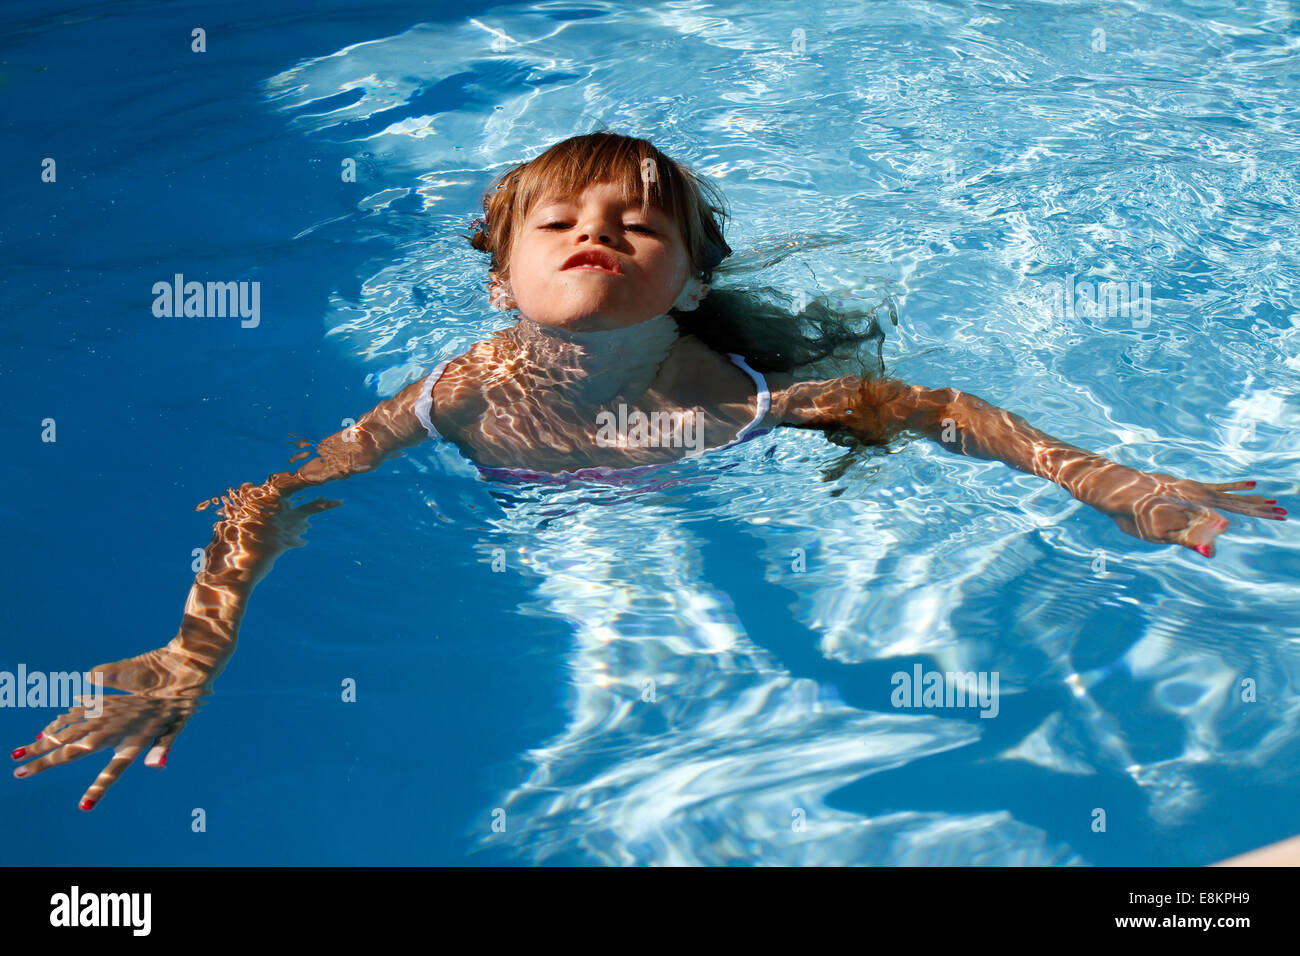 A 6-year old girl swimming for the first time without armbands in a swimming pool. Stock Photo